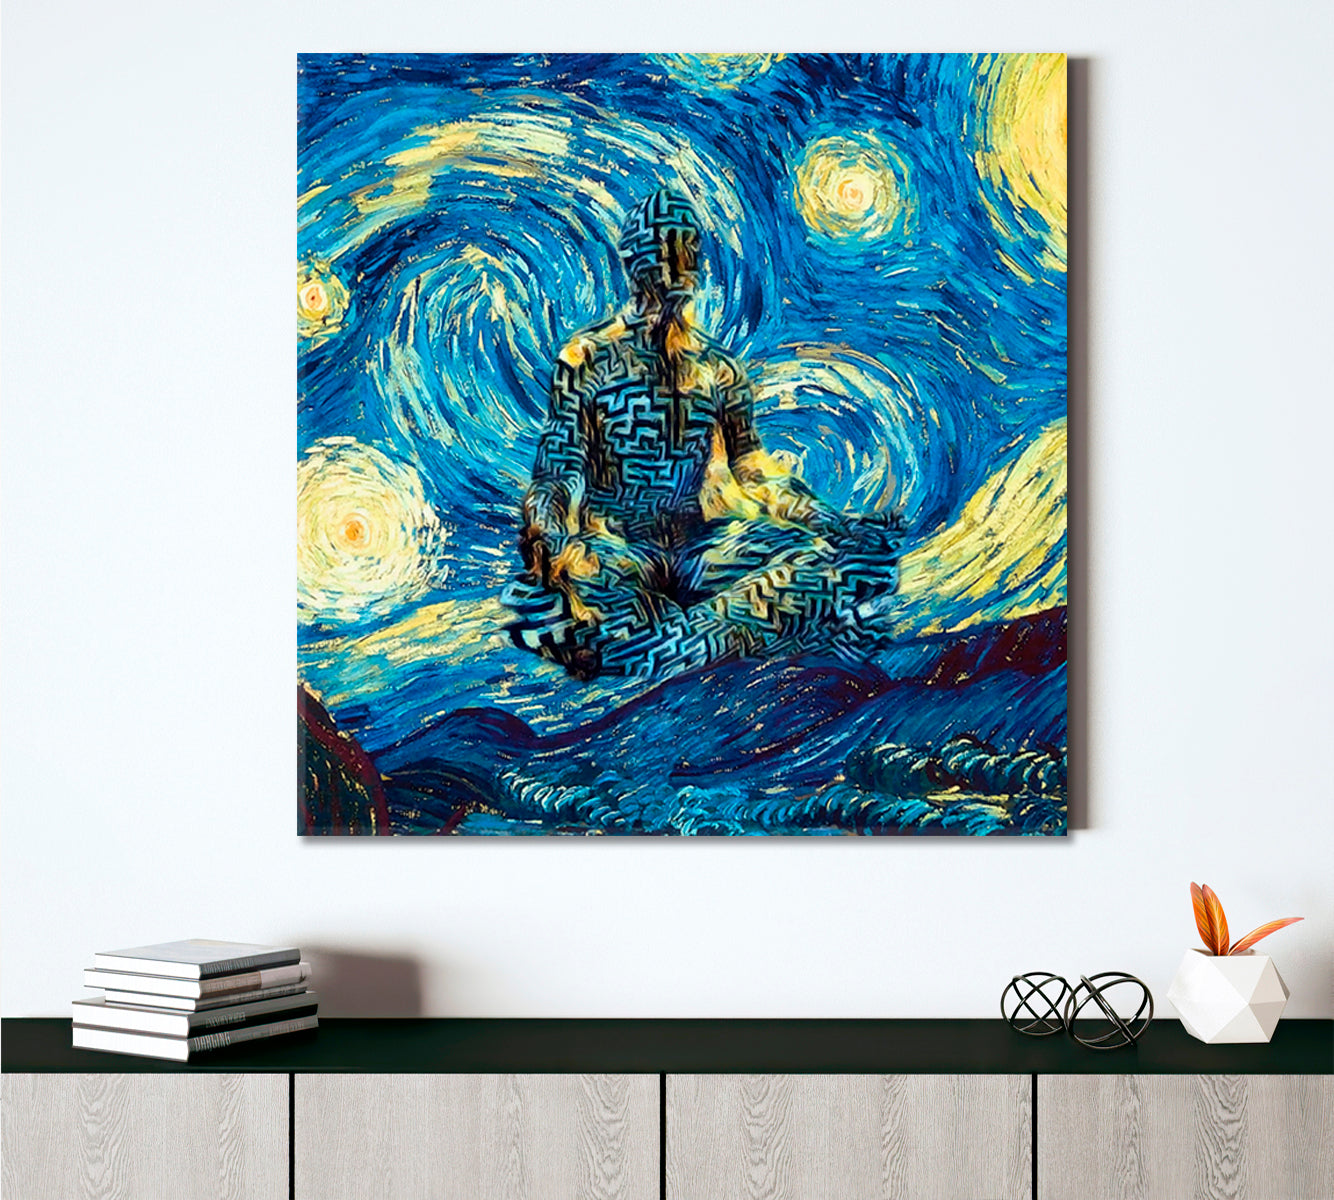 INSPIRED BY VAN GOGH Man In Lotus Pose Surreal Fantasy Large Art Print Décor Artesty   